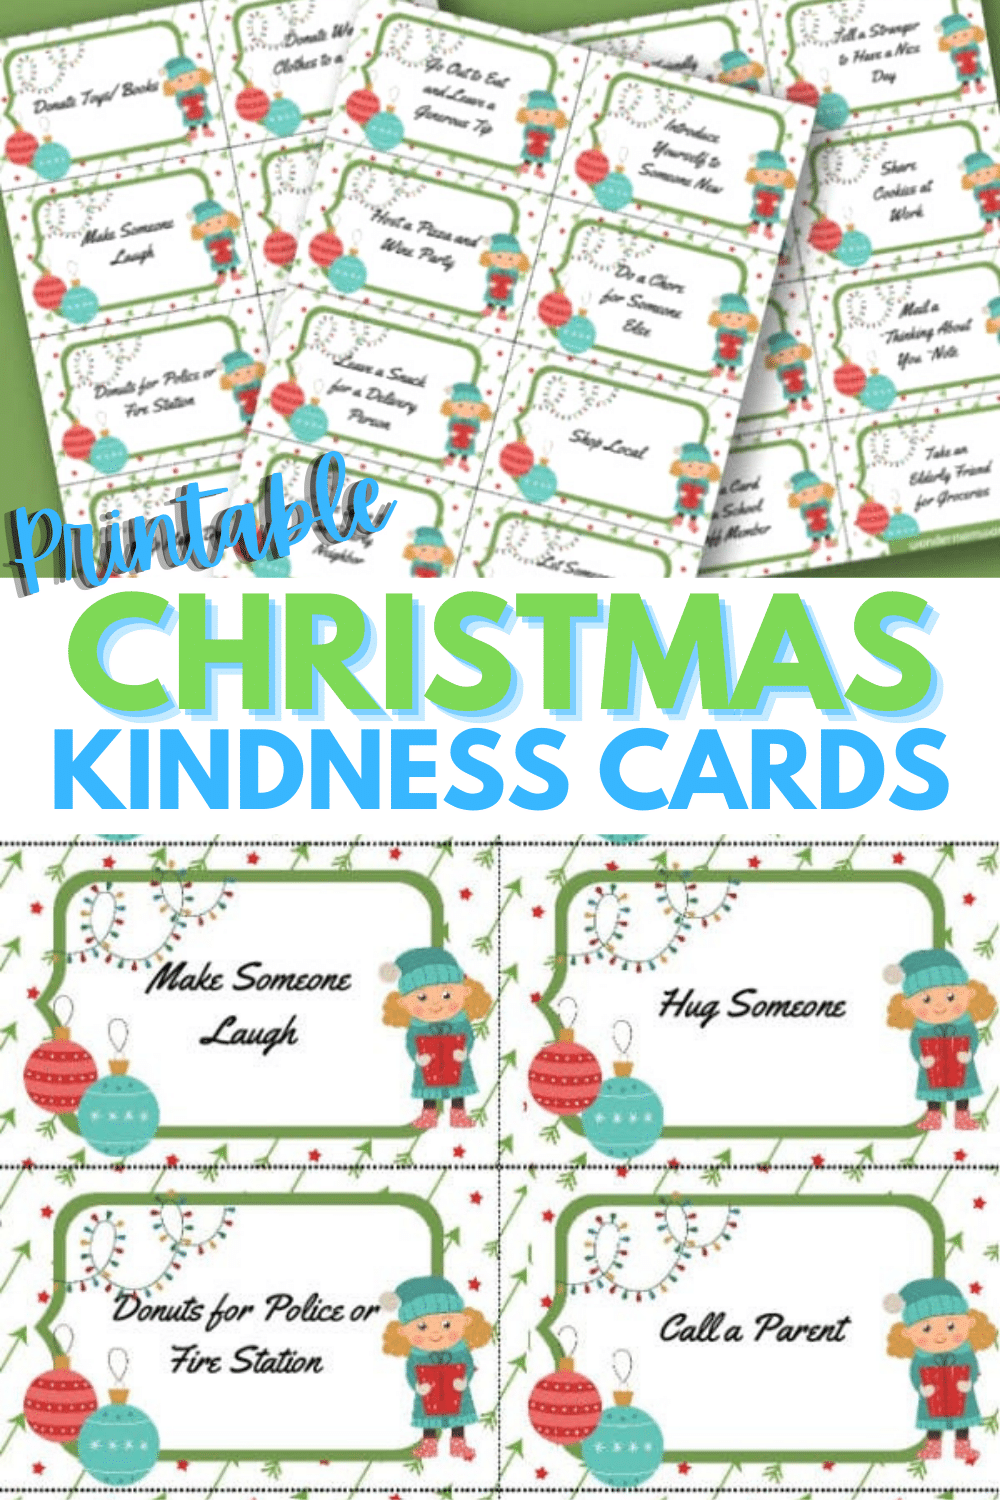 Offering a delightful collection of printable Christmas kindness cards.